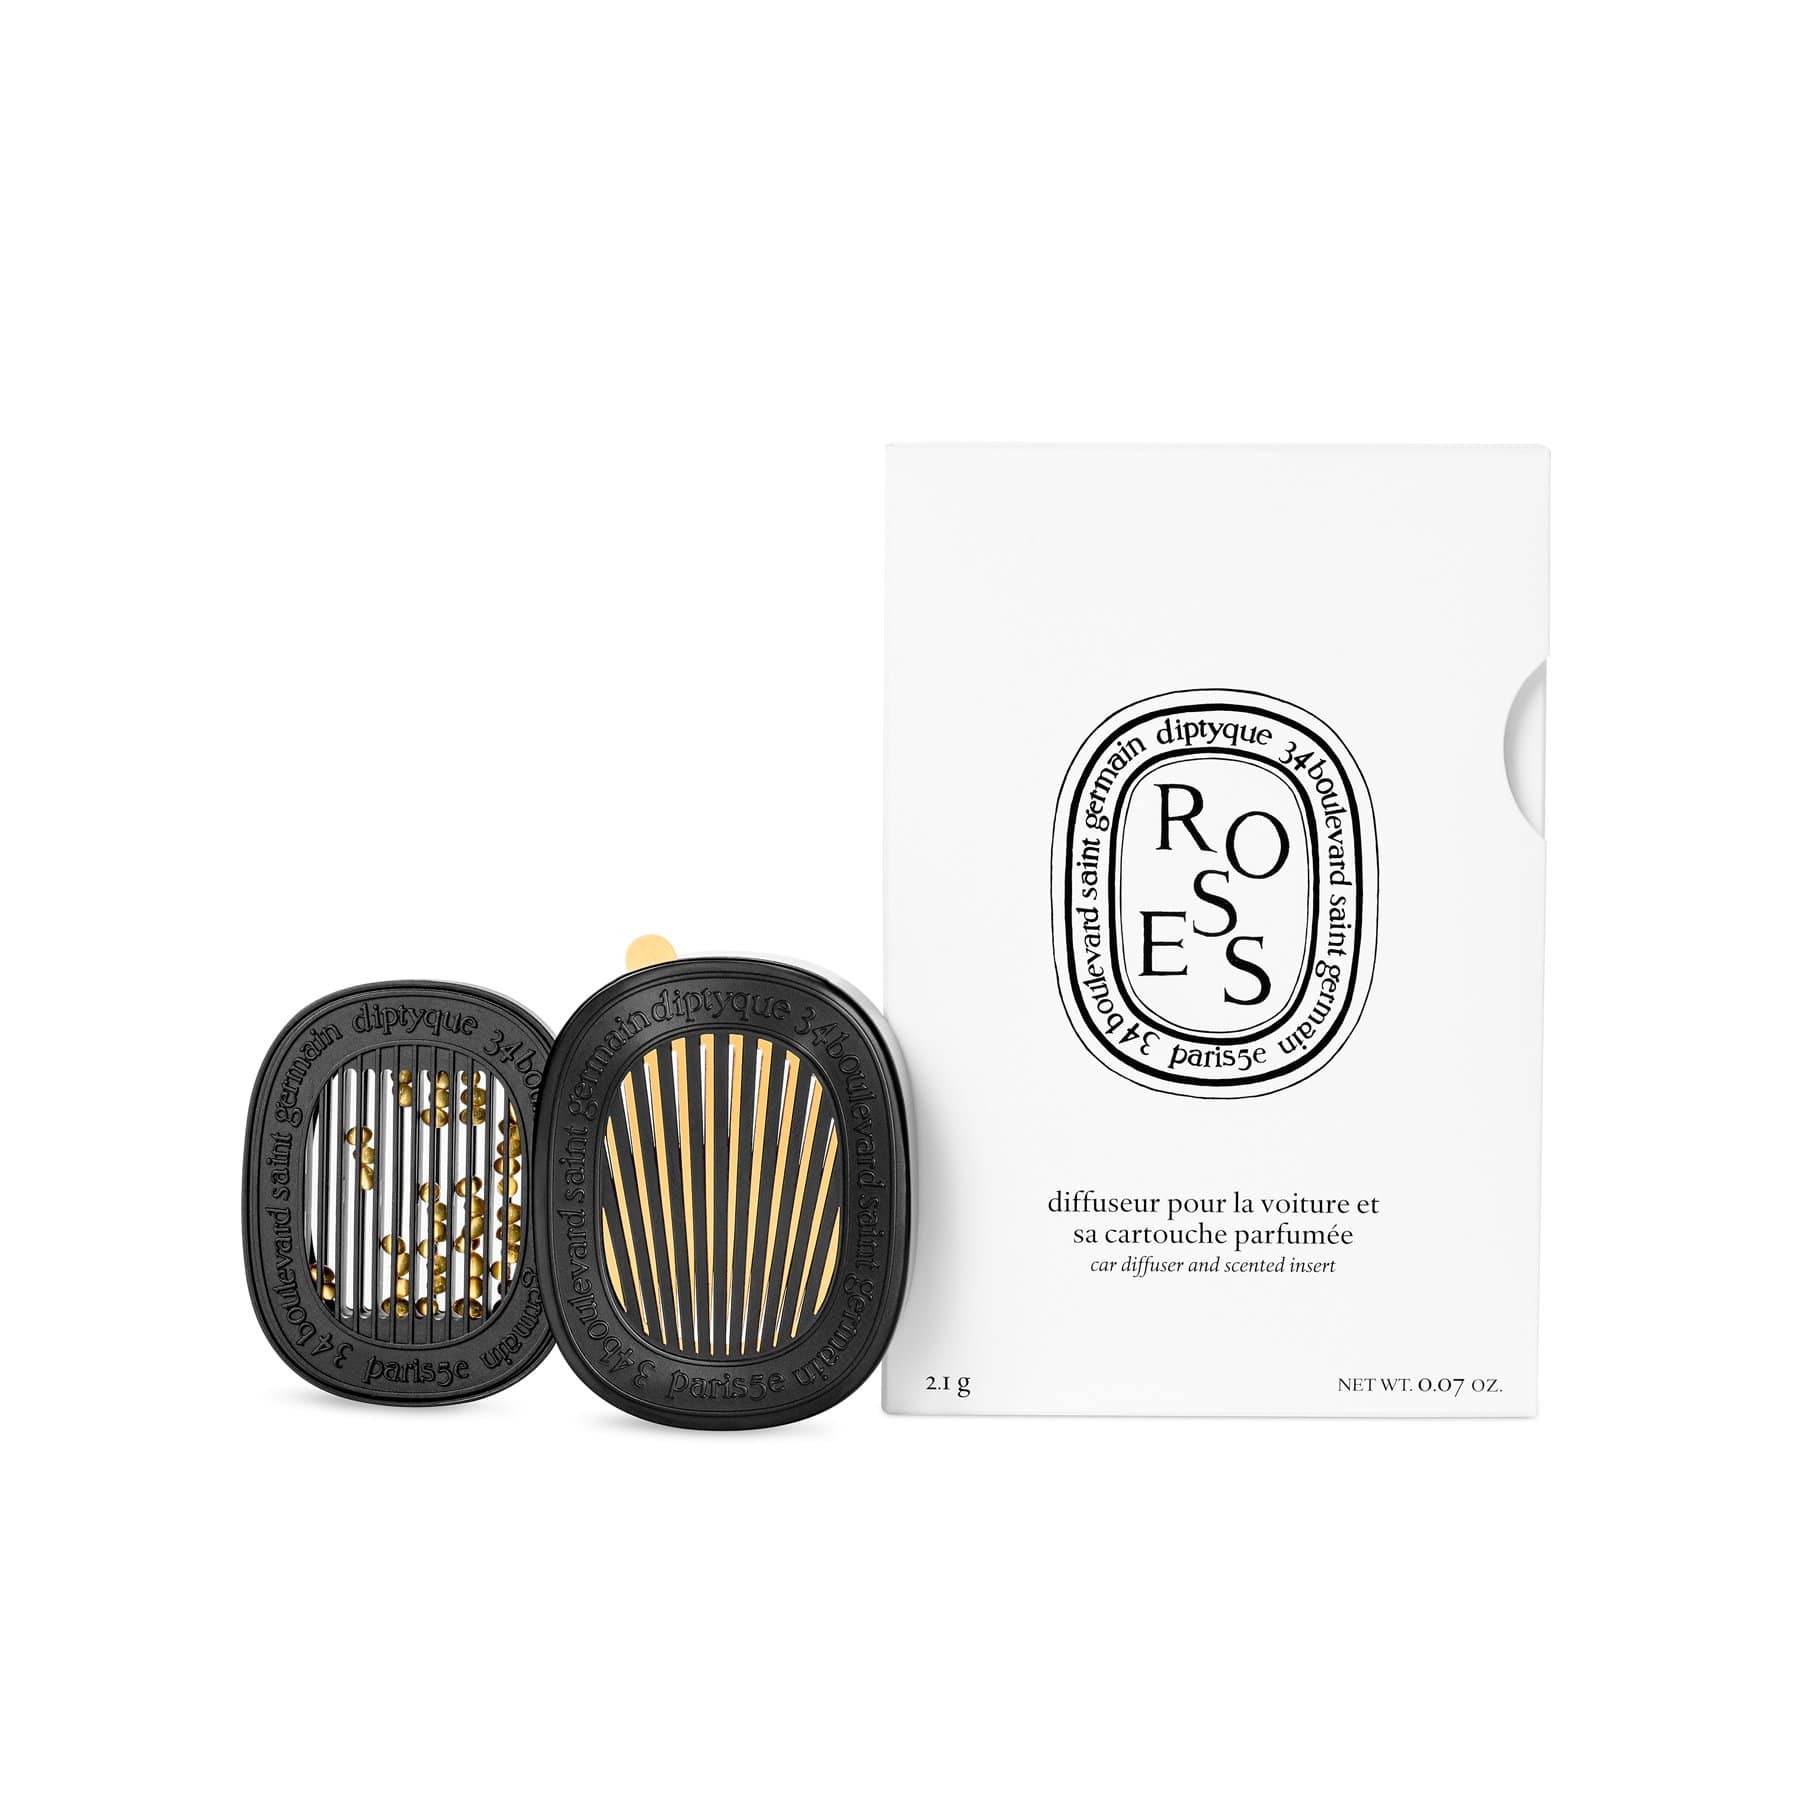 Diptyque car scent diffuser and 1 refill Car Diffuser by Roses